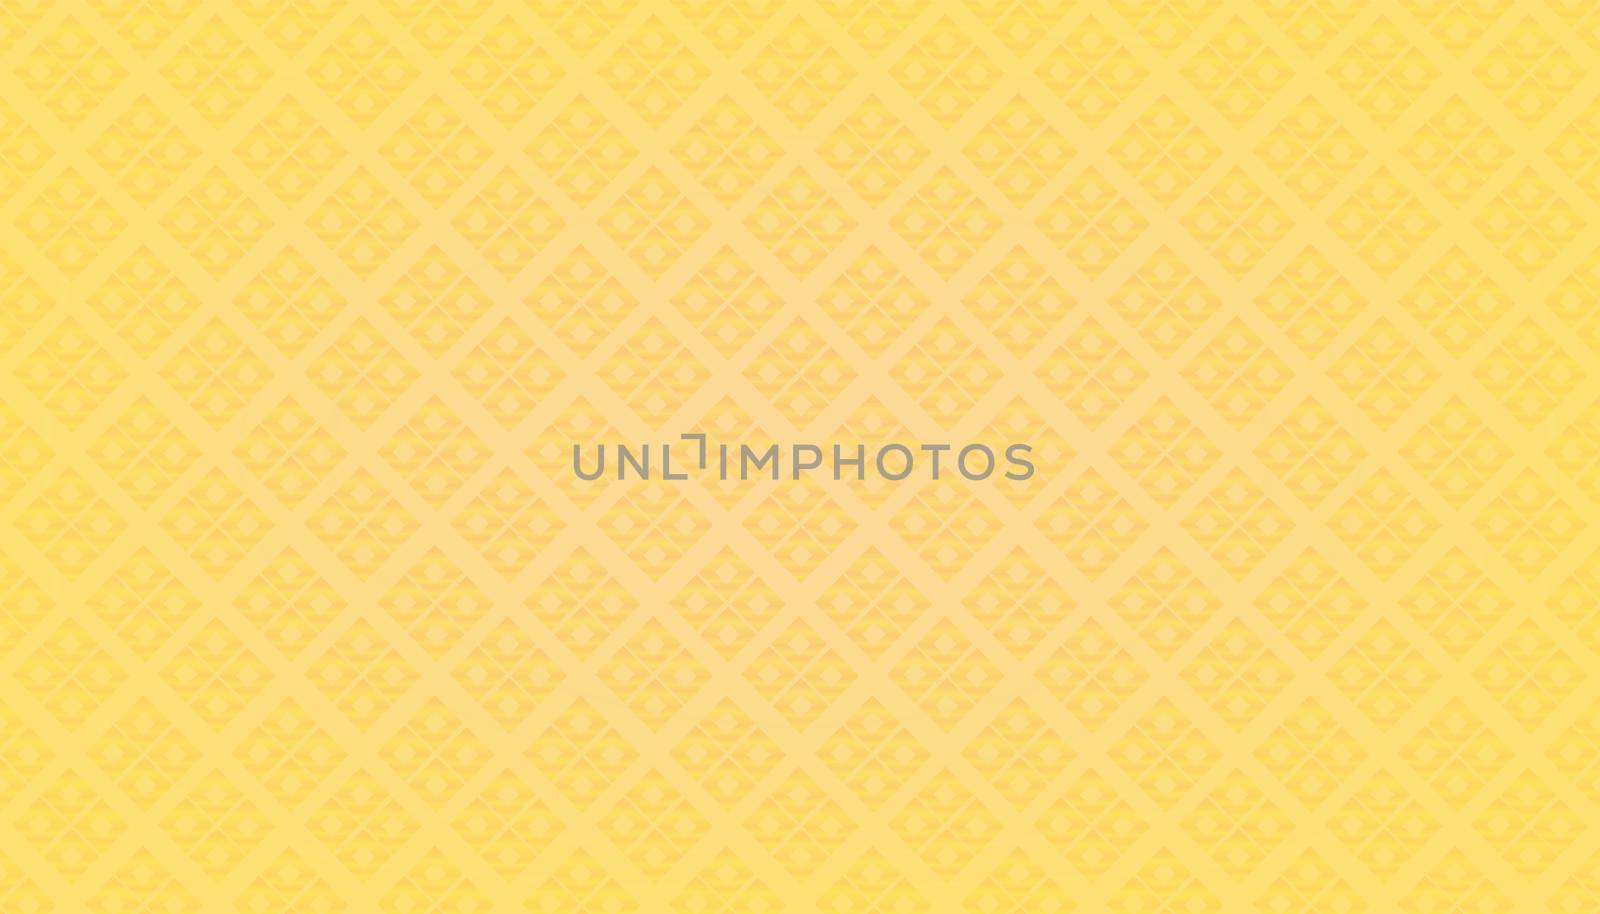 abstract rectangle group plaid alignment yellow tone.background texture design. vector illustration eps10